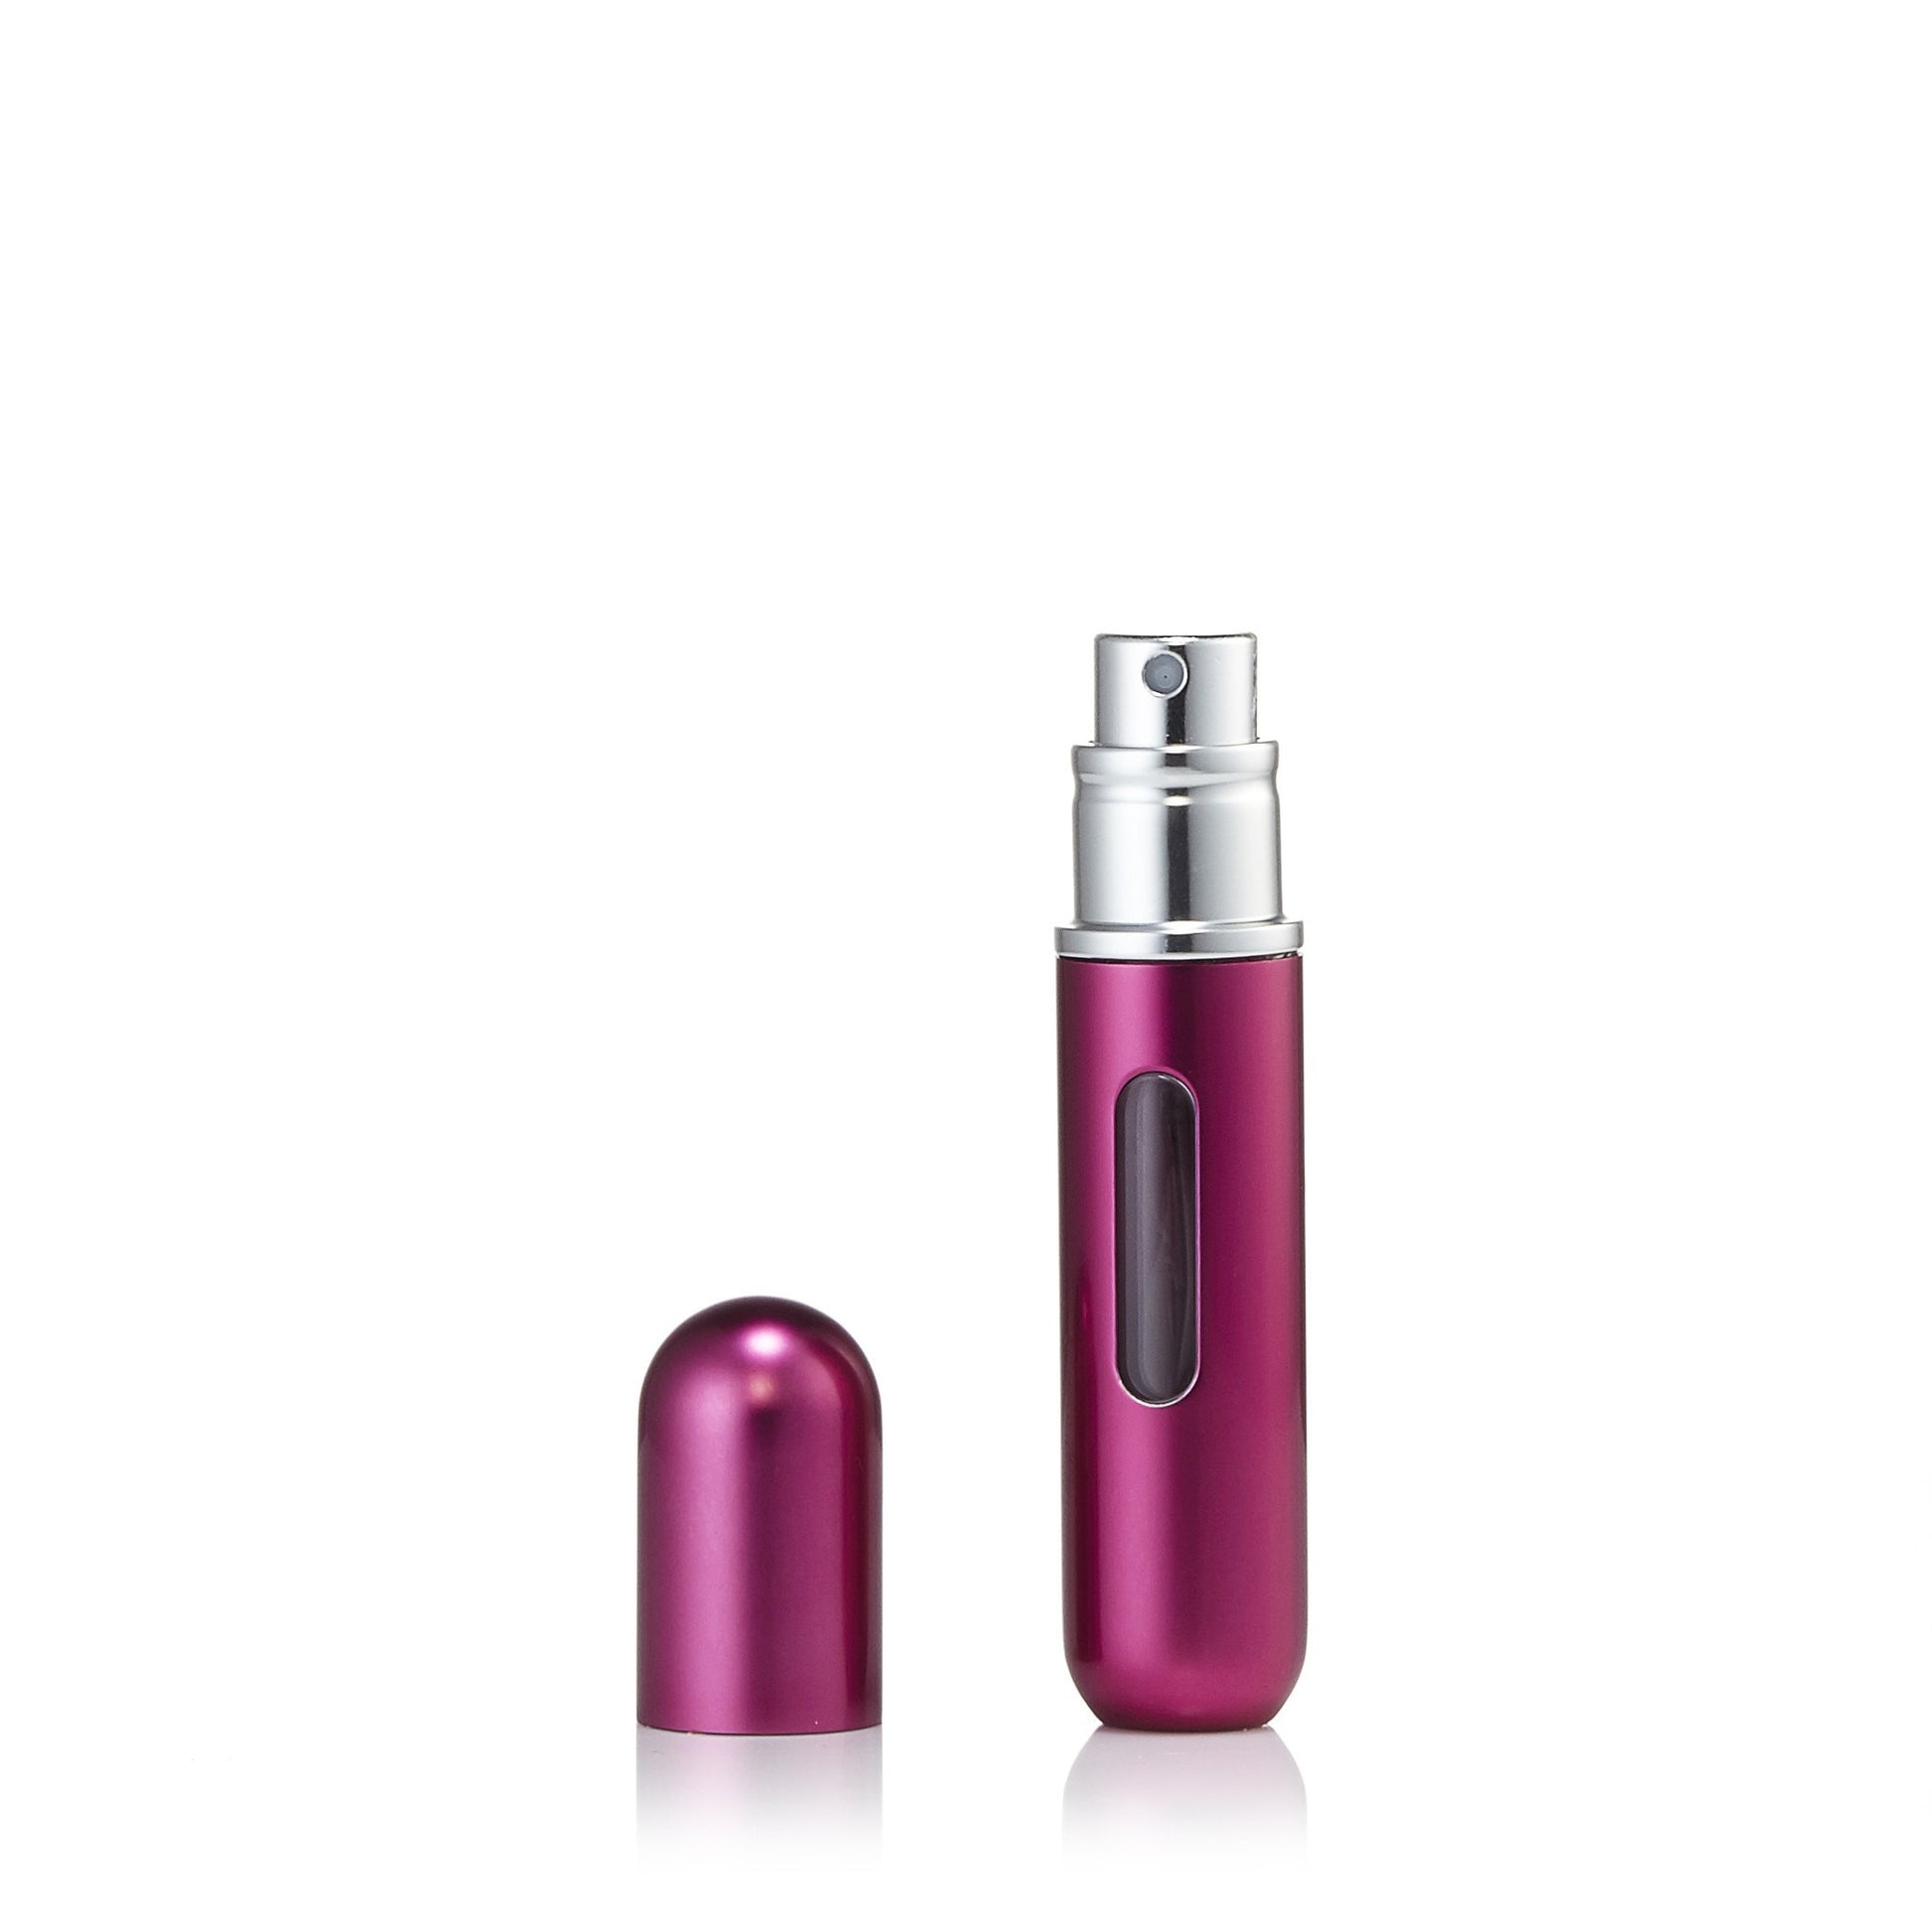 Pump and Fill Fragrance Atomizer by Flo Hot Pink Click to open in modal